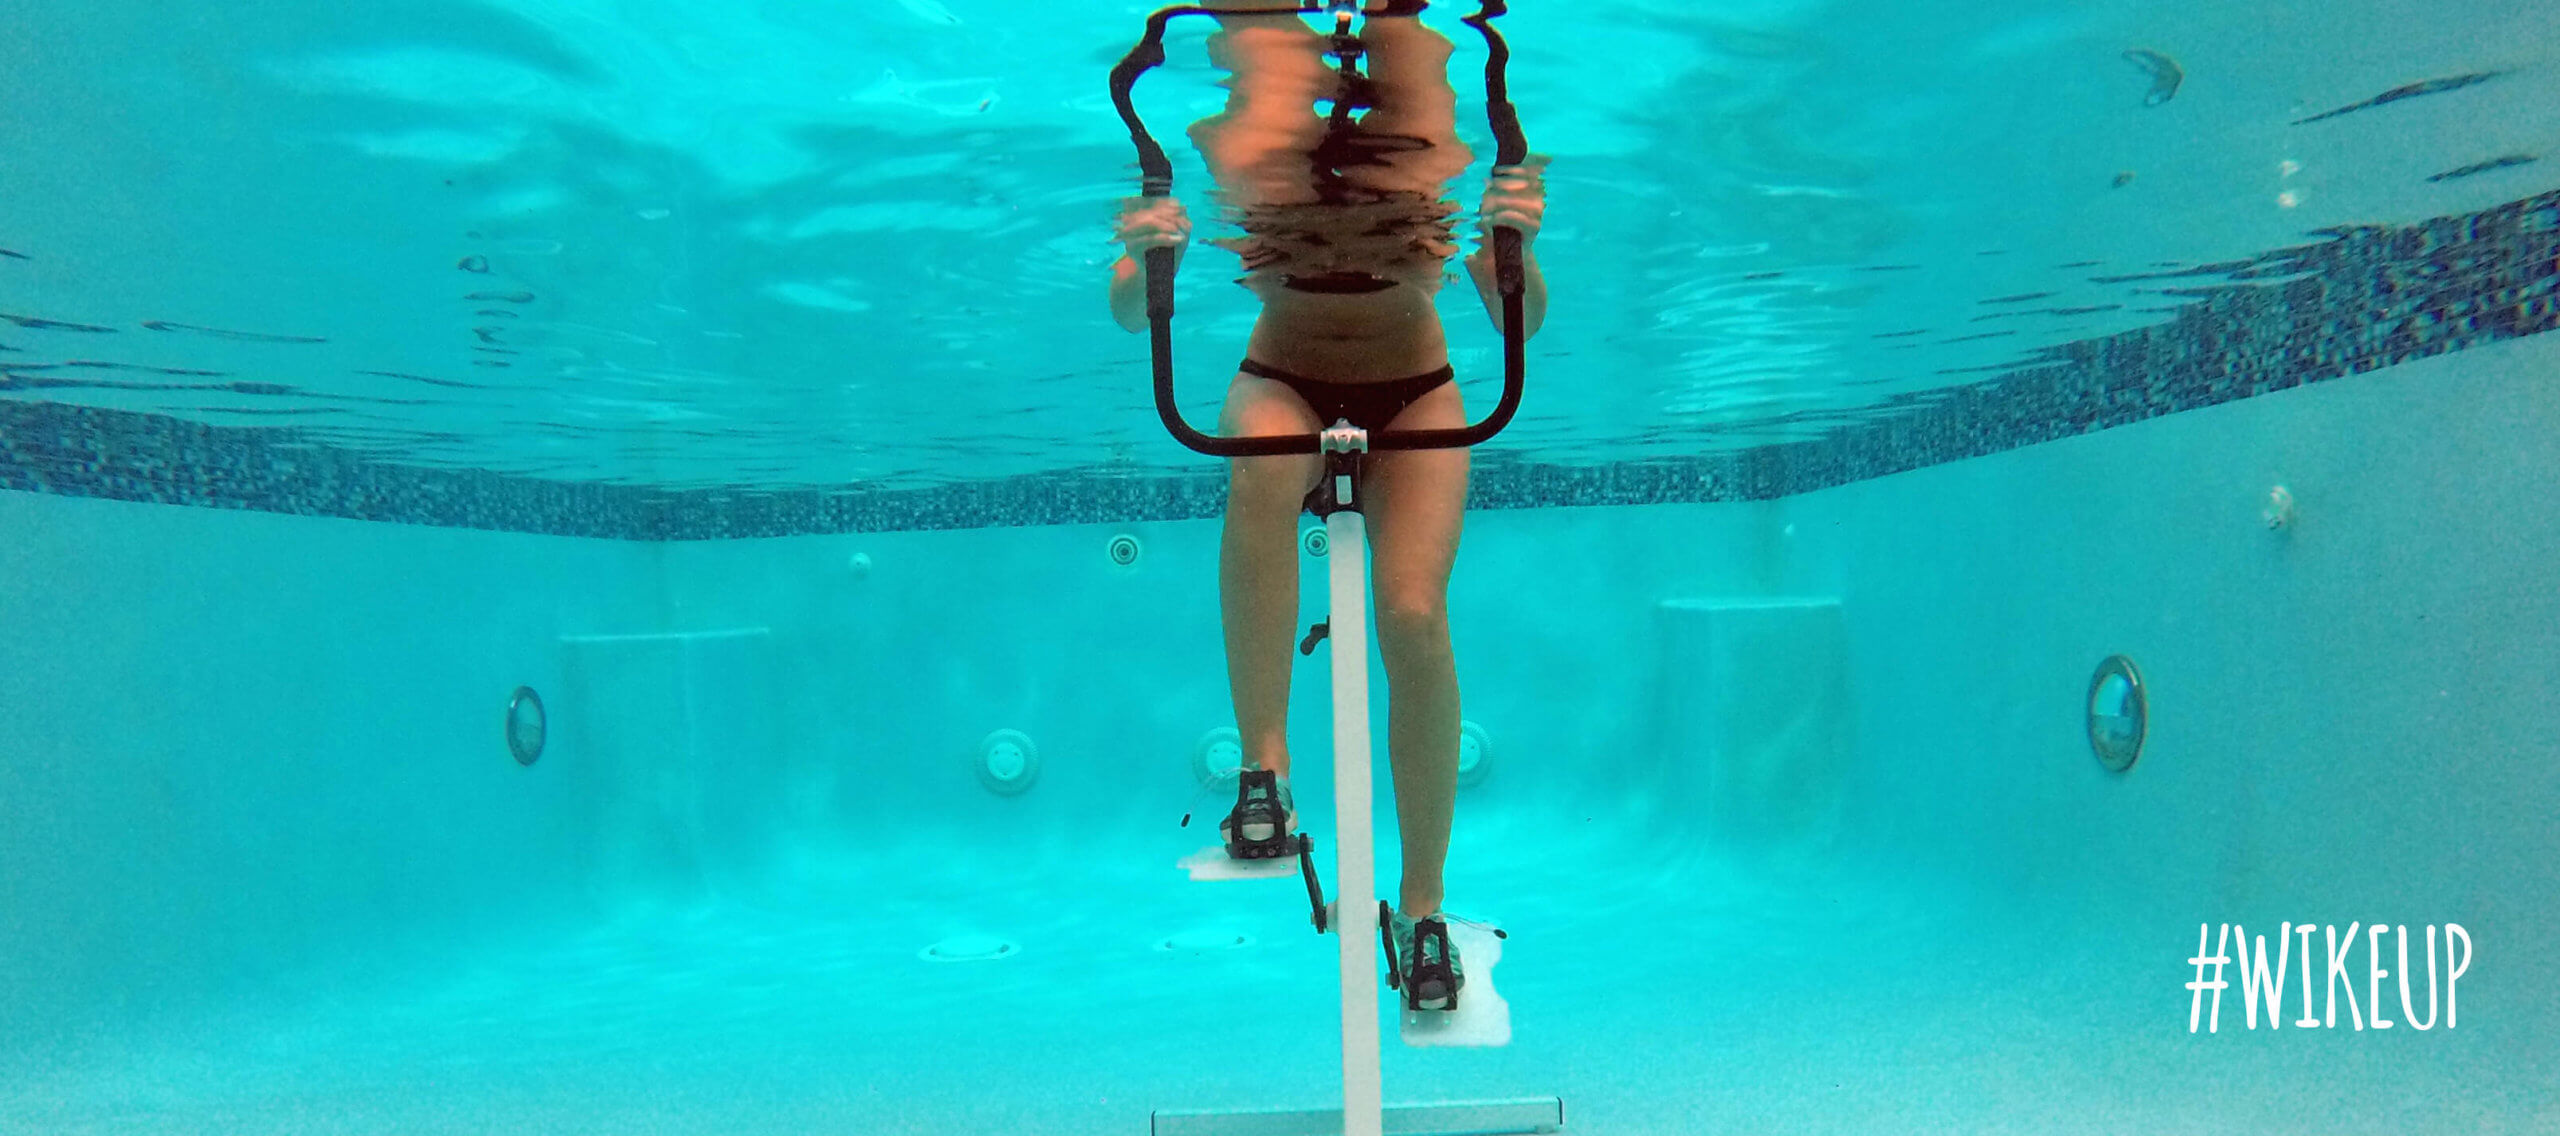 Wike-Up! aquabikes are perfect for low-impact workouts.